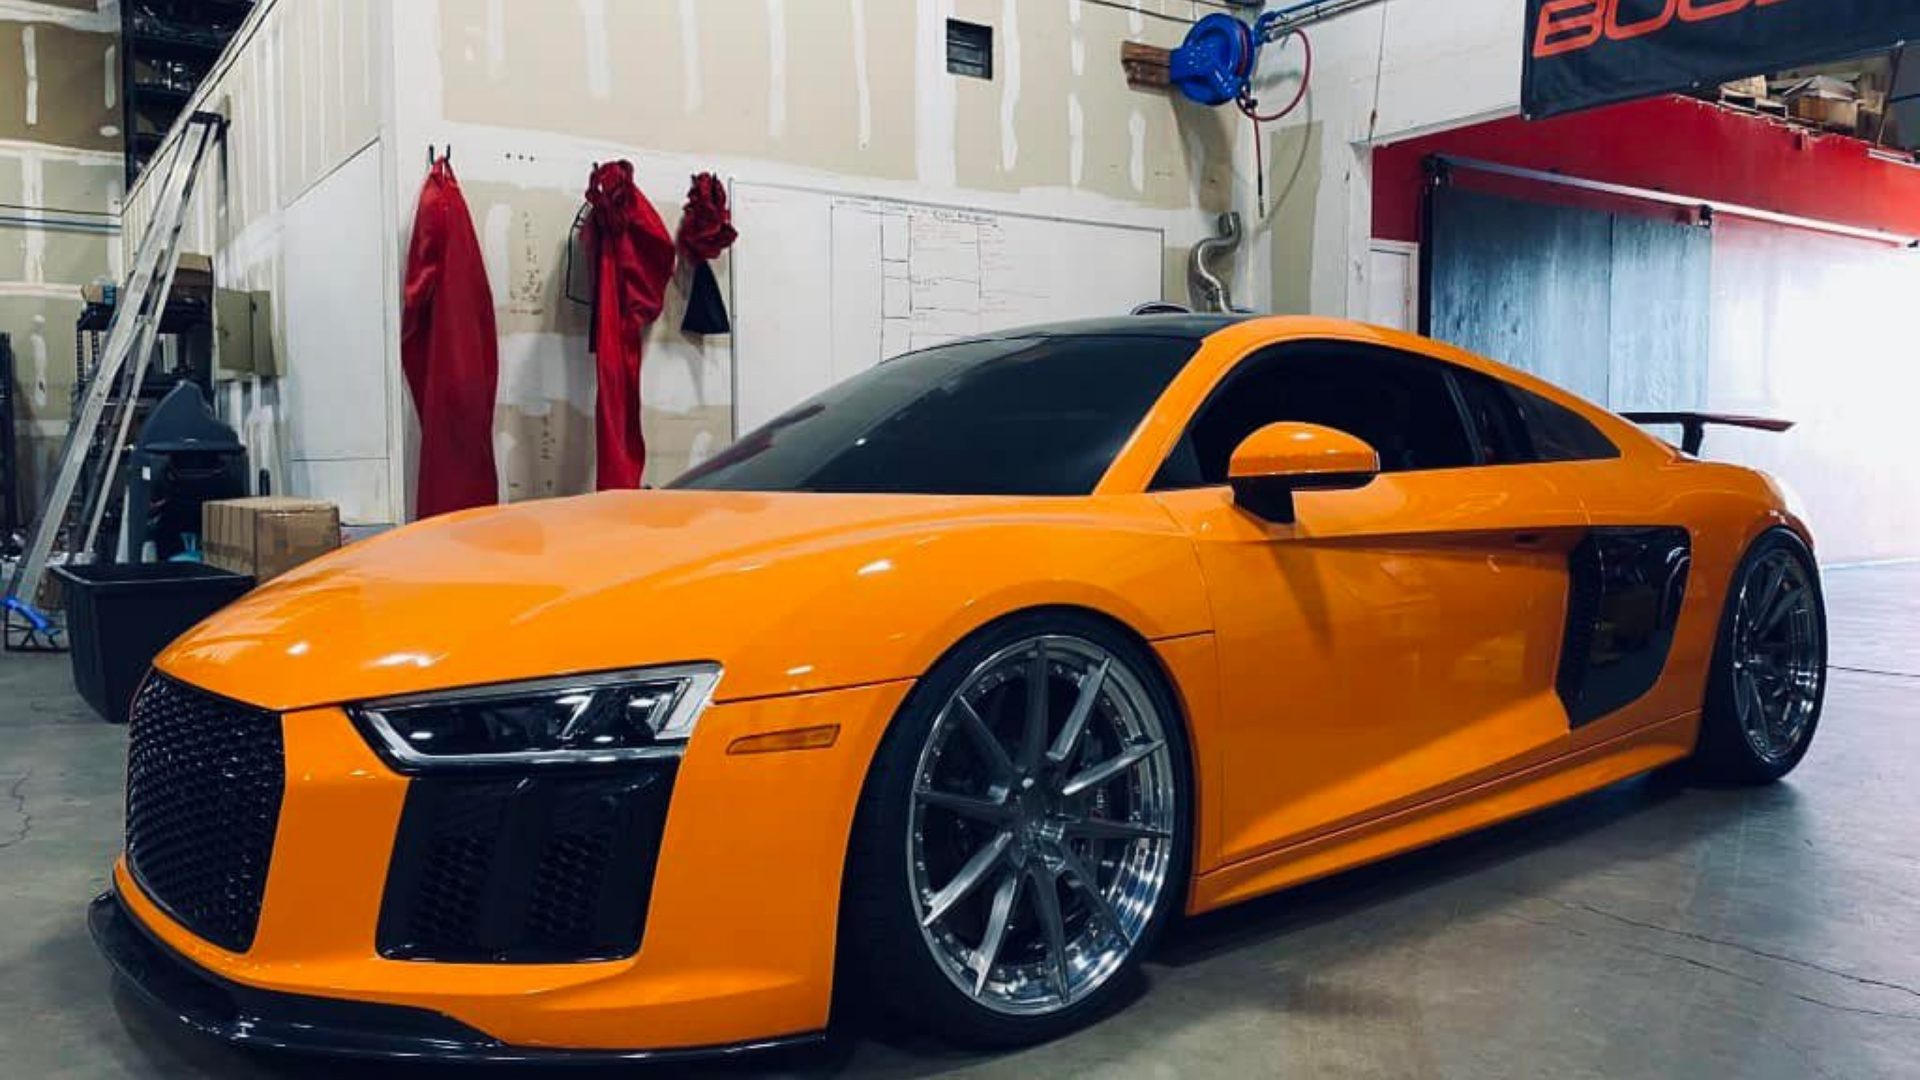 Chase Lautenbach to Debut Boost LogicBuilt TwinTurbo Audi R8 at